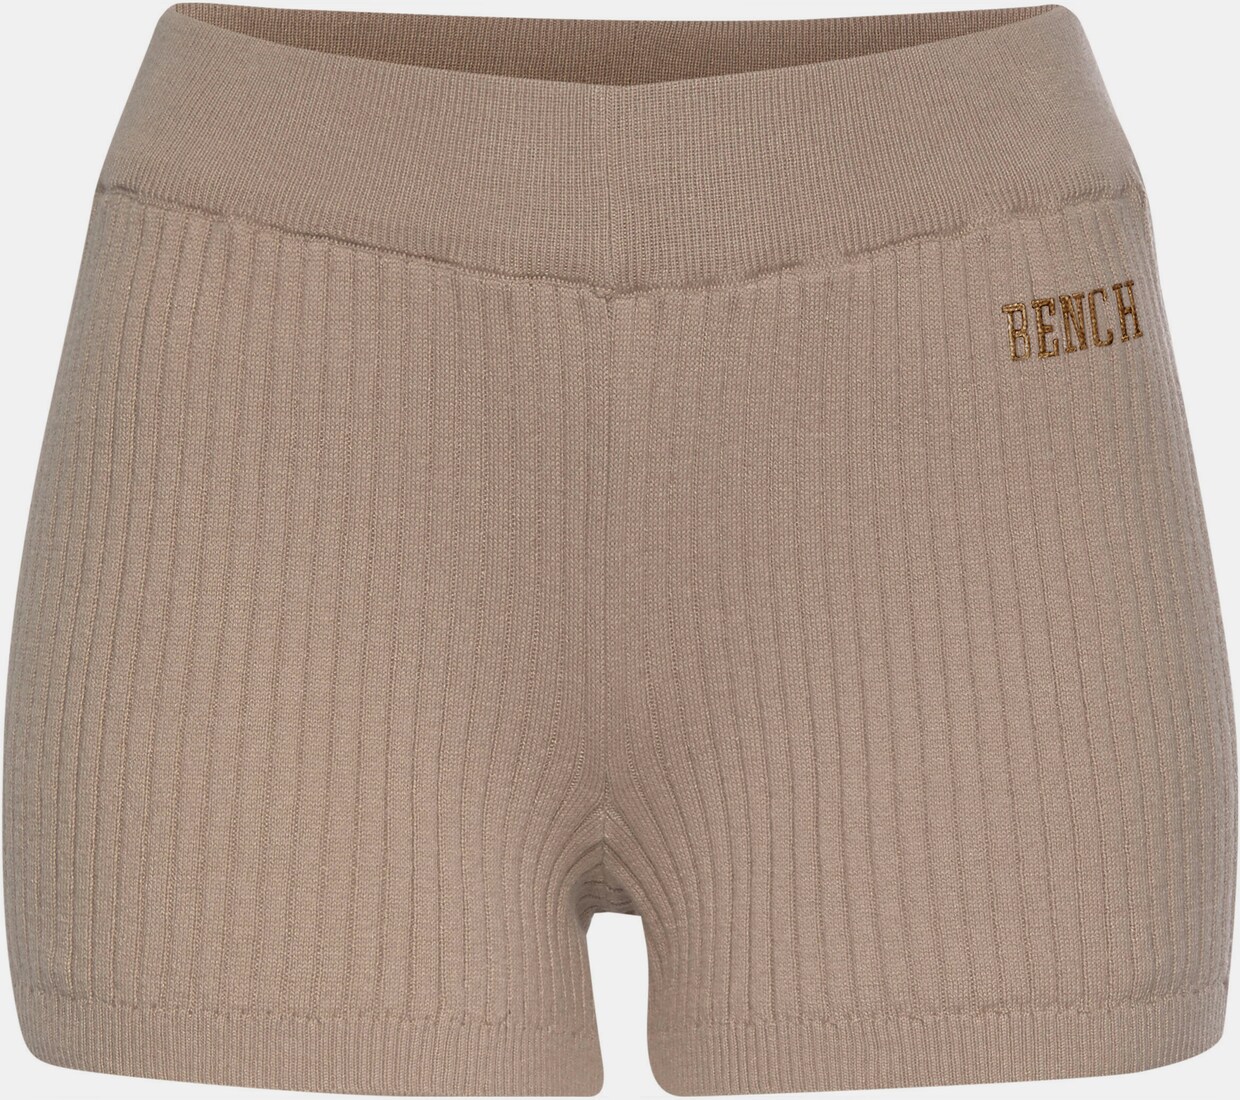 Bench. Shorts - hellbeige-taupe